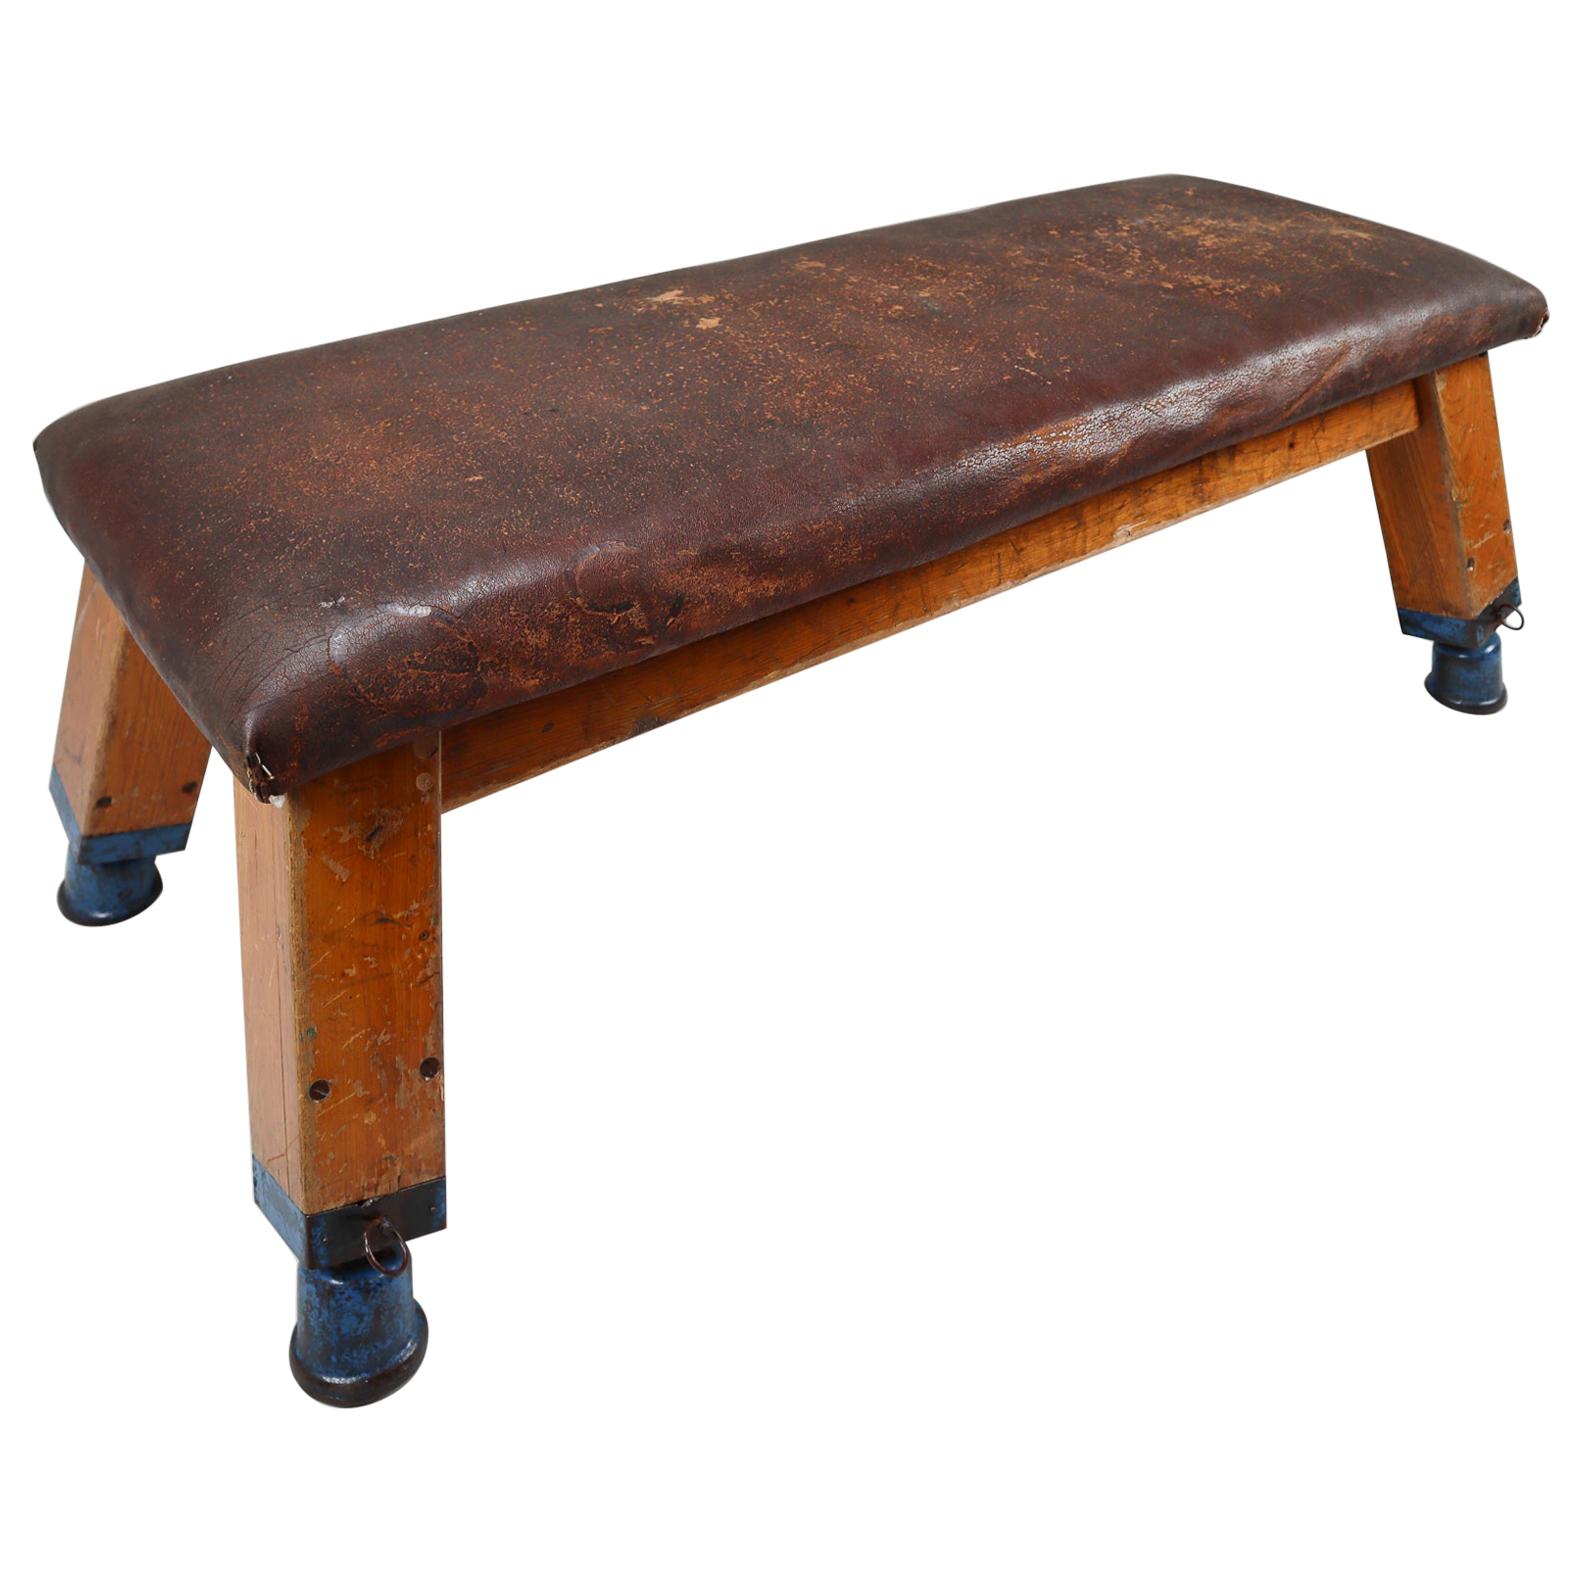 European Patinated Leather Gym Bench or Table, circa 1950s